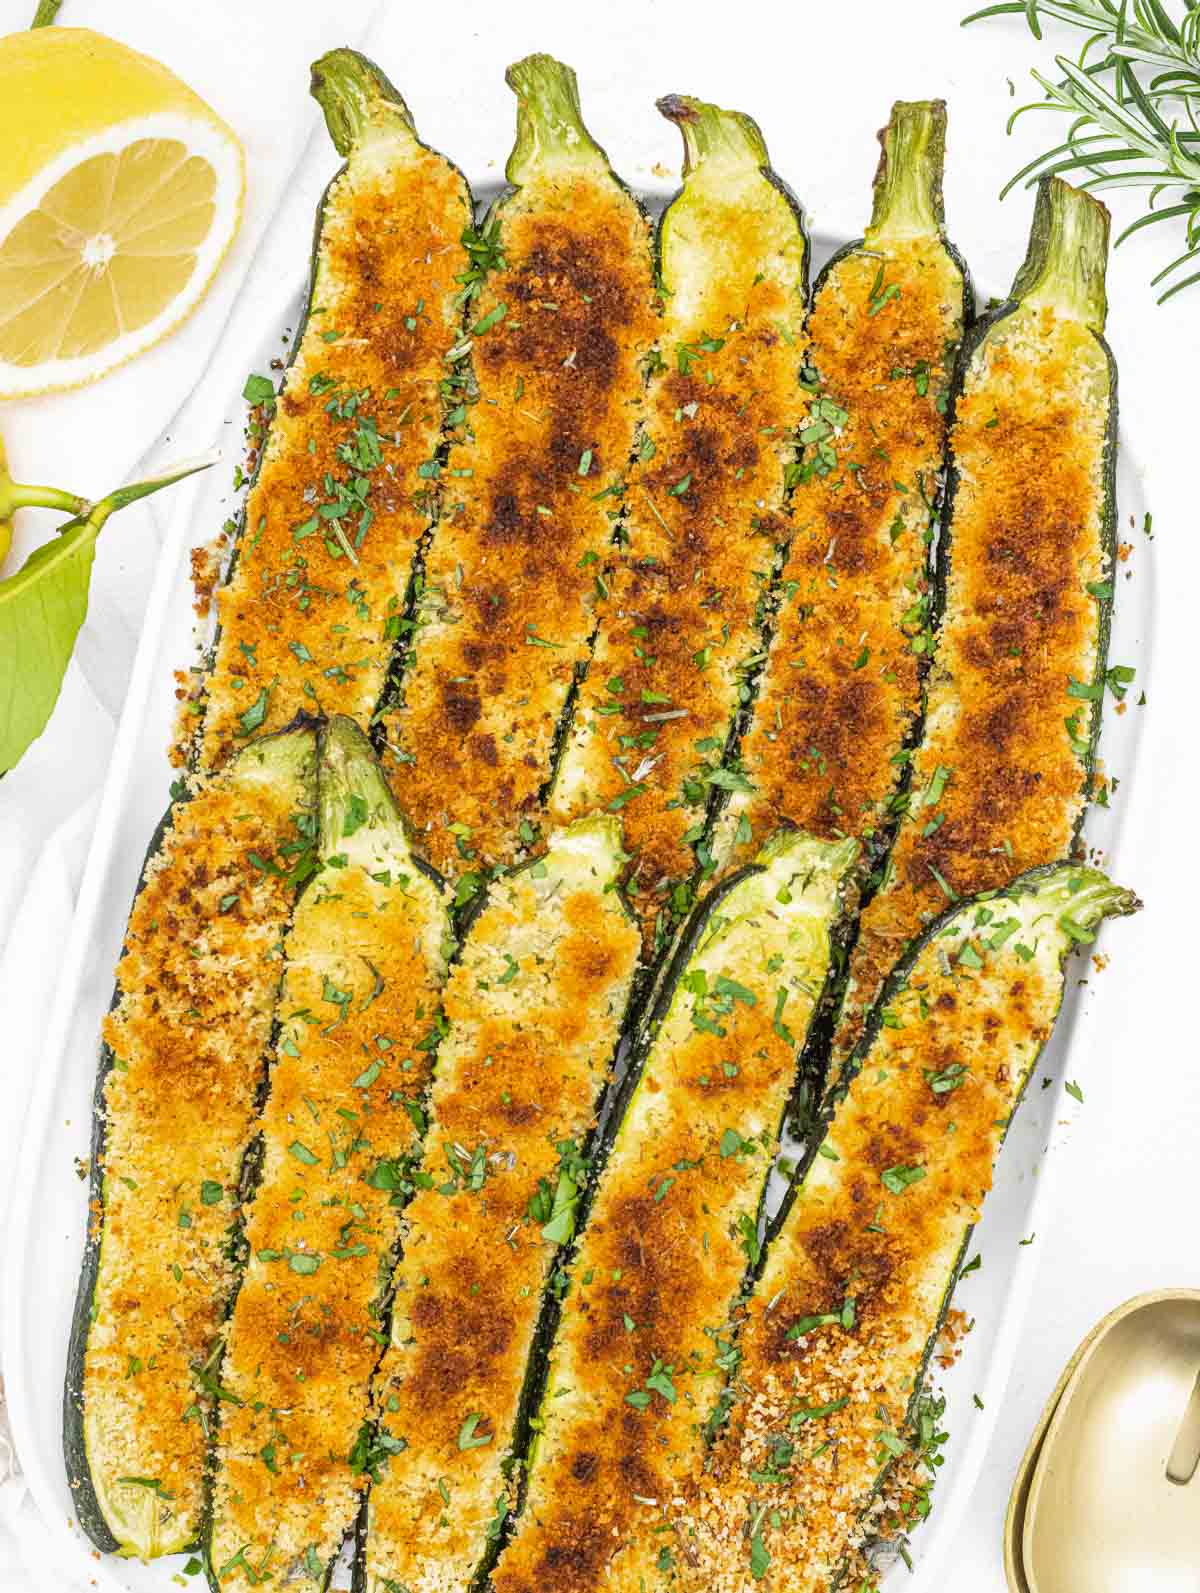 Roasted zucchini with lemon and breadcrumbs